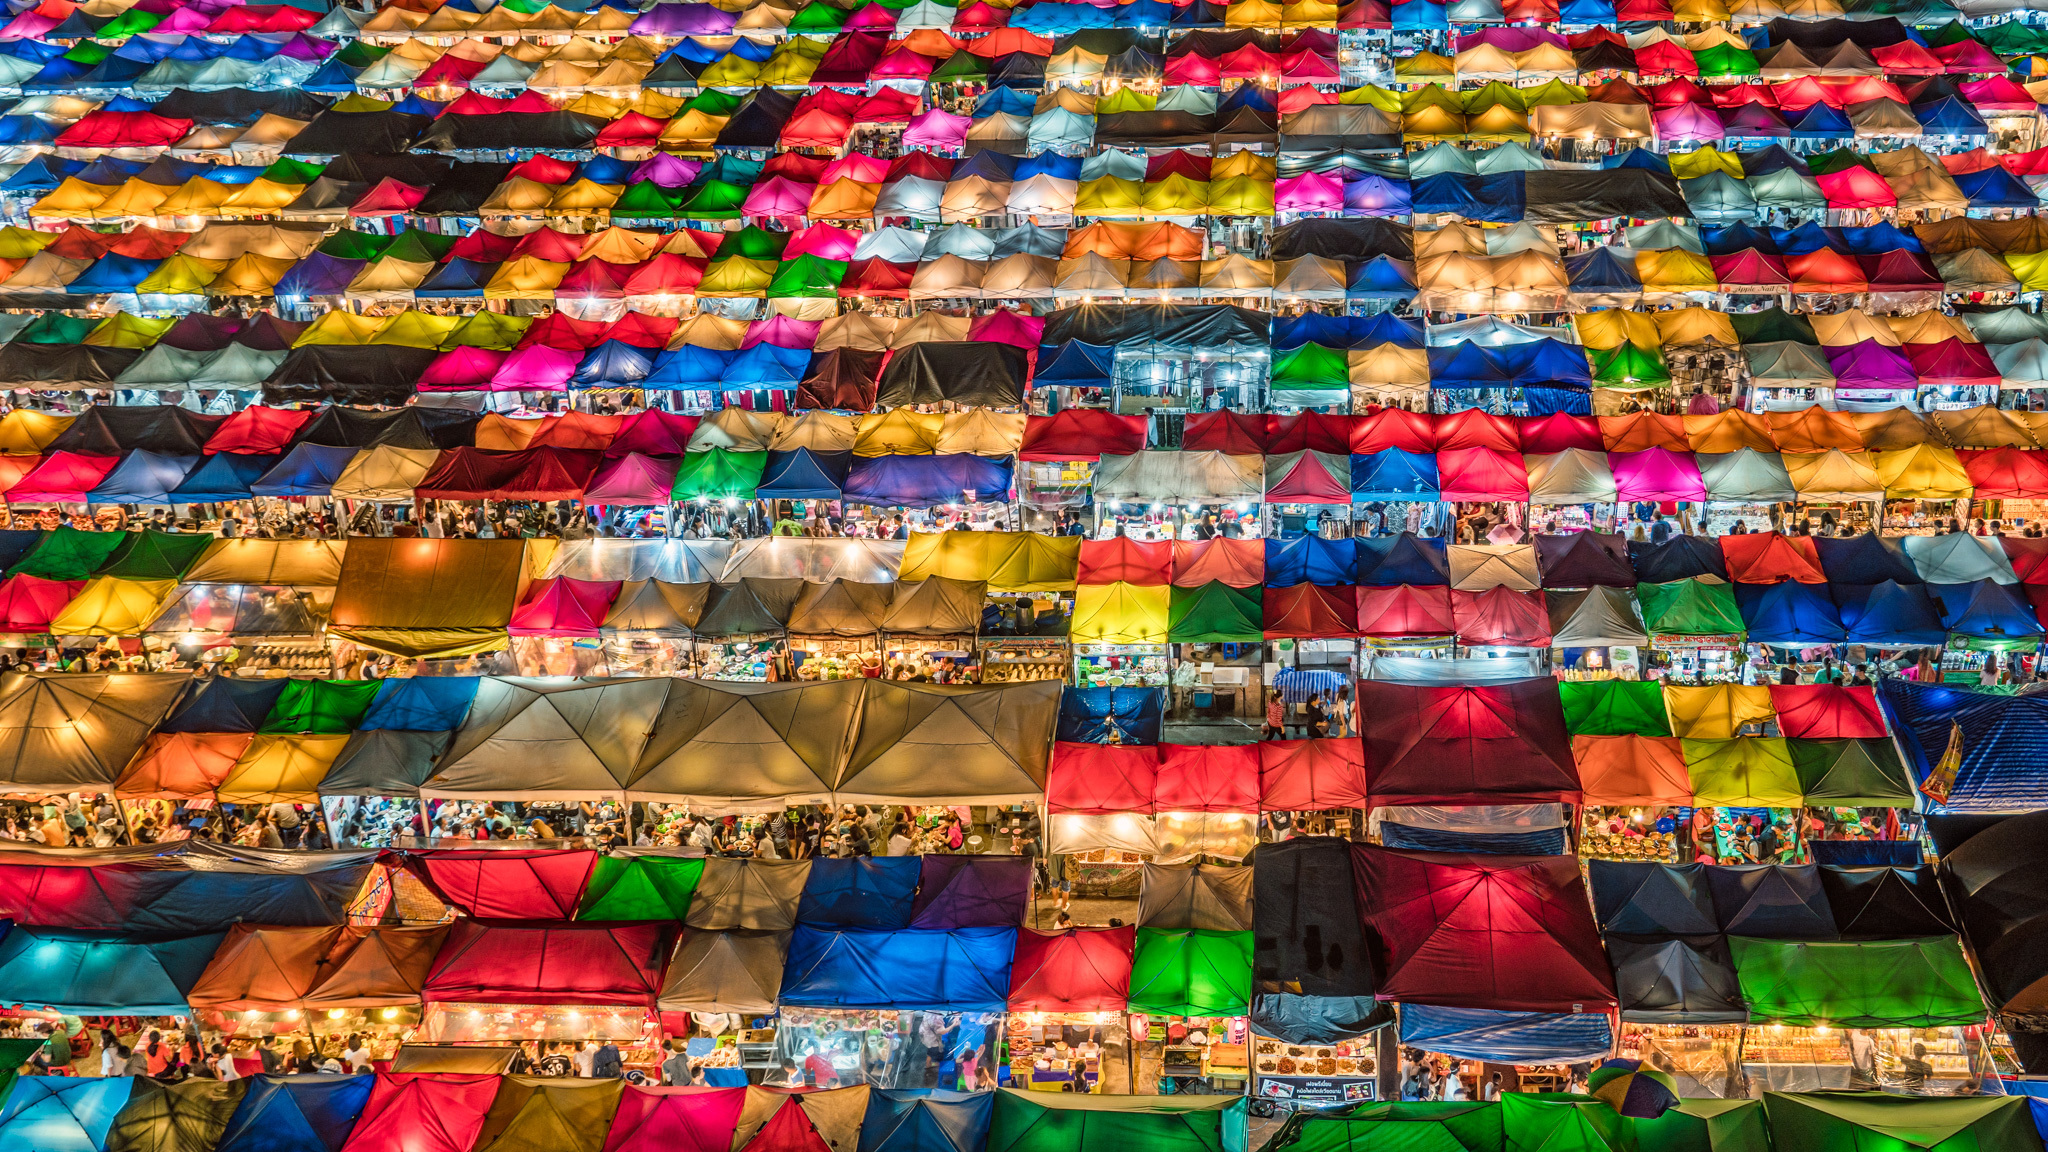 photography, colors, market, night, tent